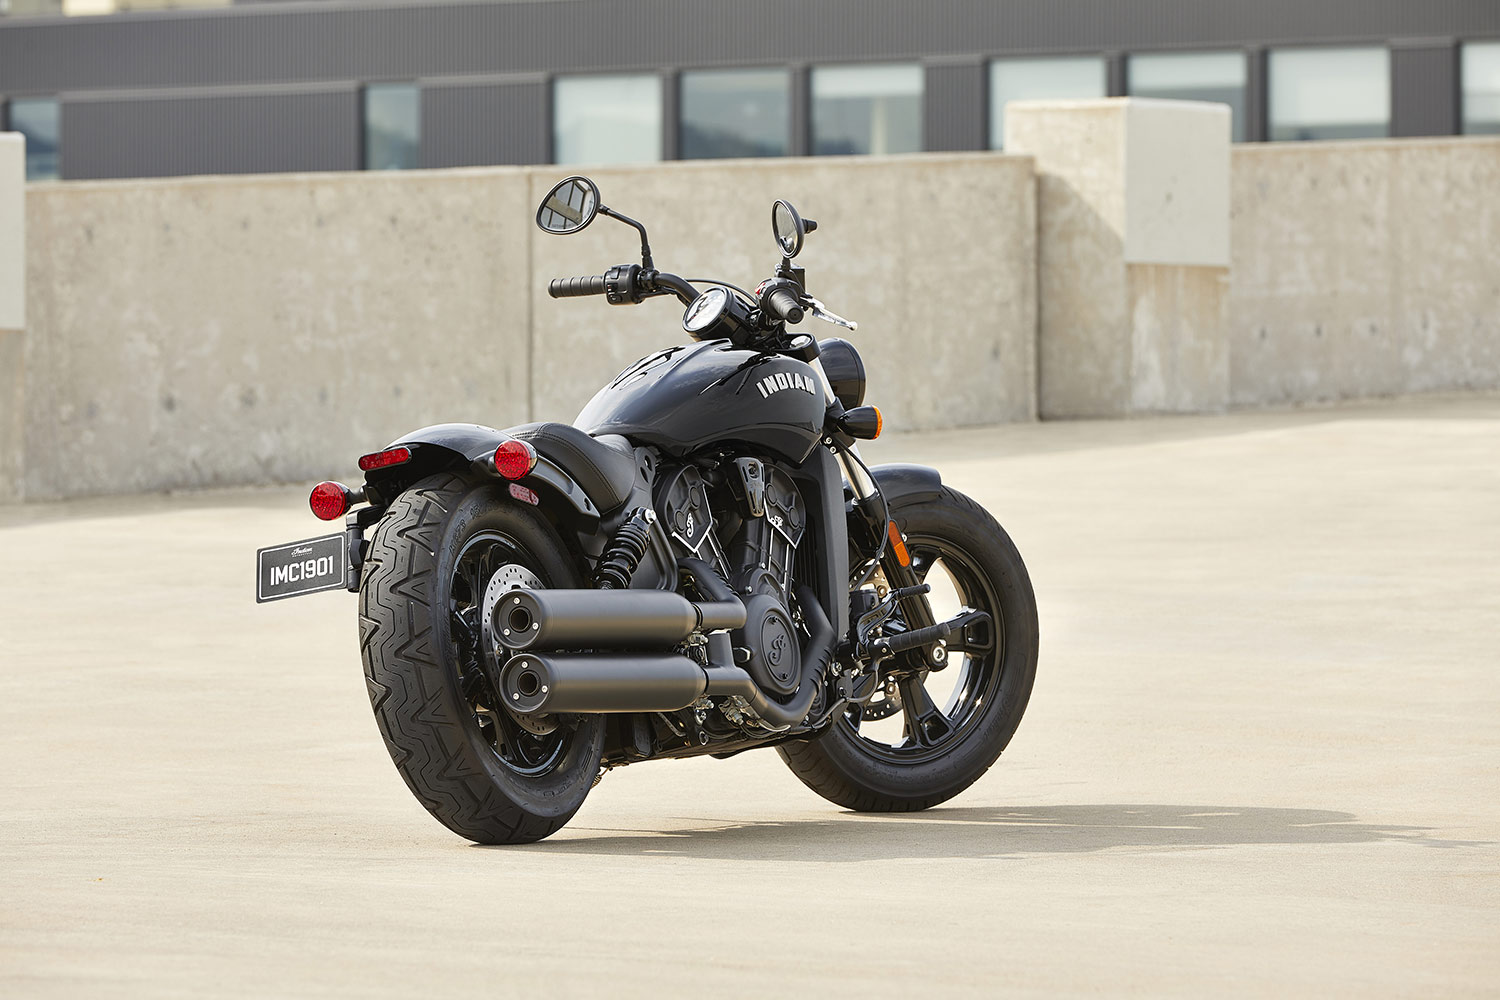 2021 Indian Scout Bobber Sixty Buyer's Guide: Specs, Photos, Price